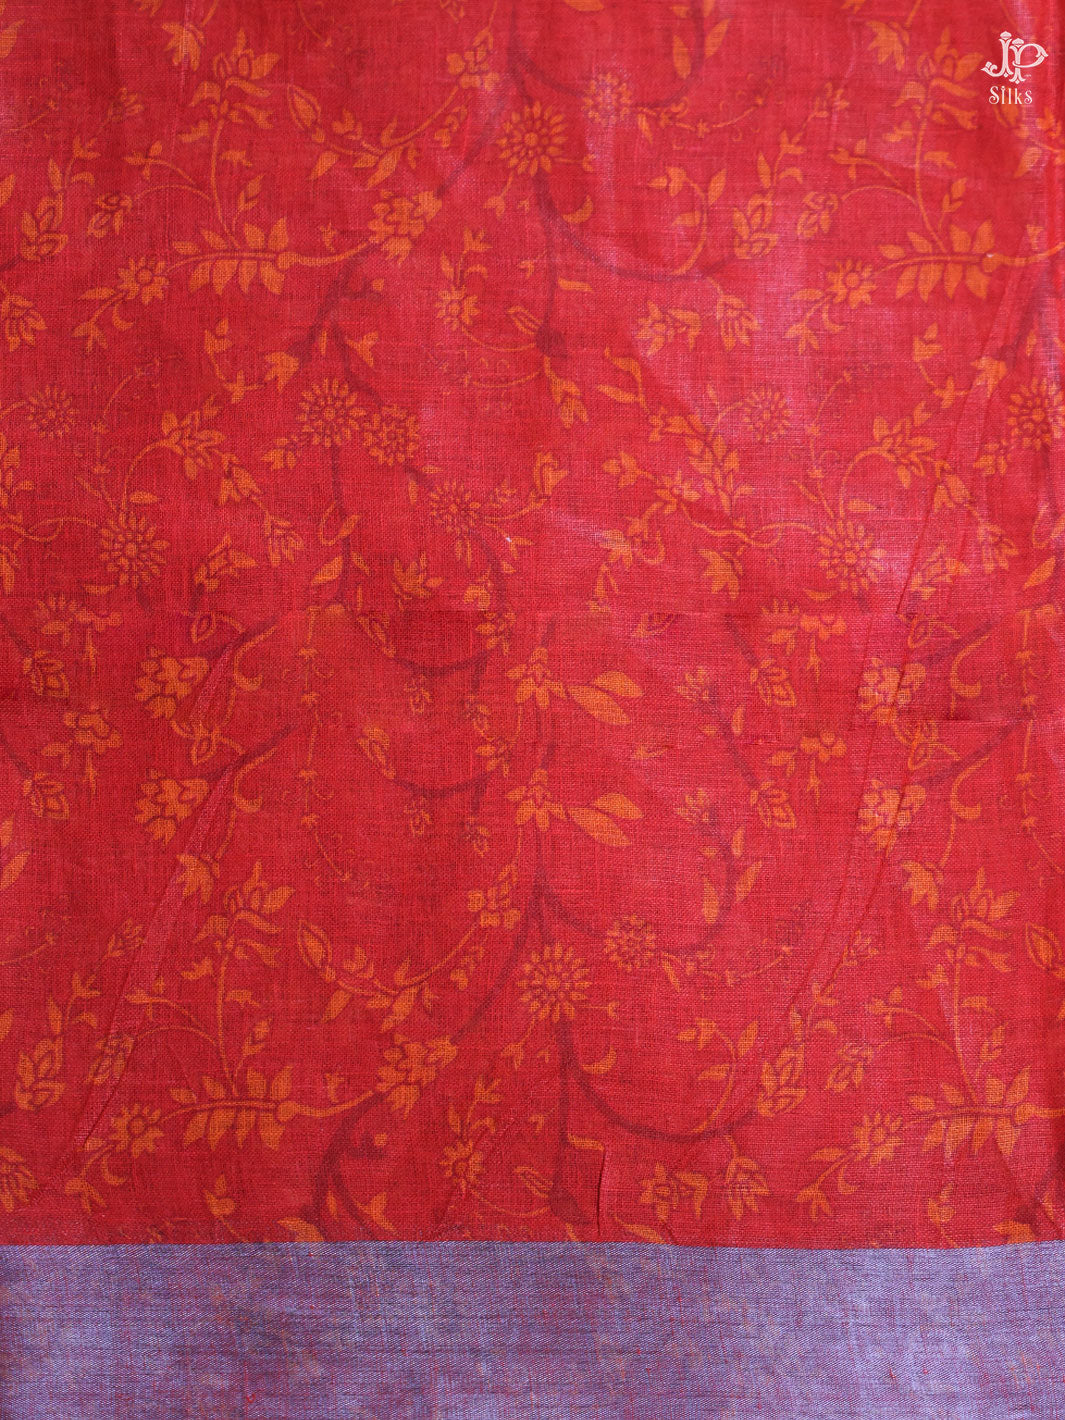 Cream and Pink - Red Linen Saree - D5820 - View 3